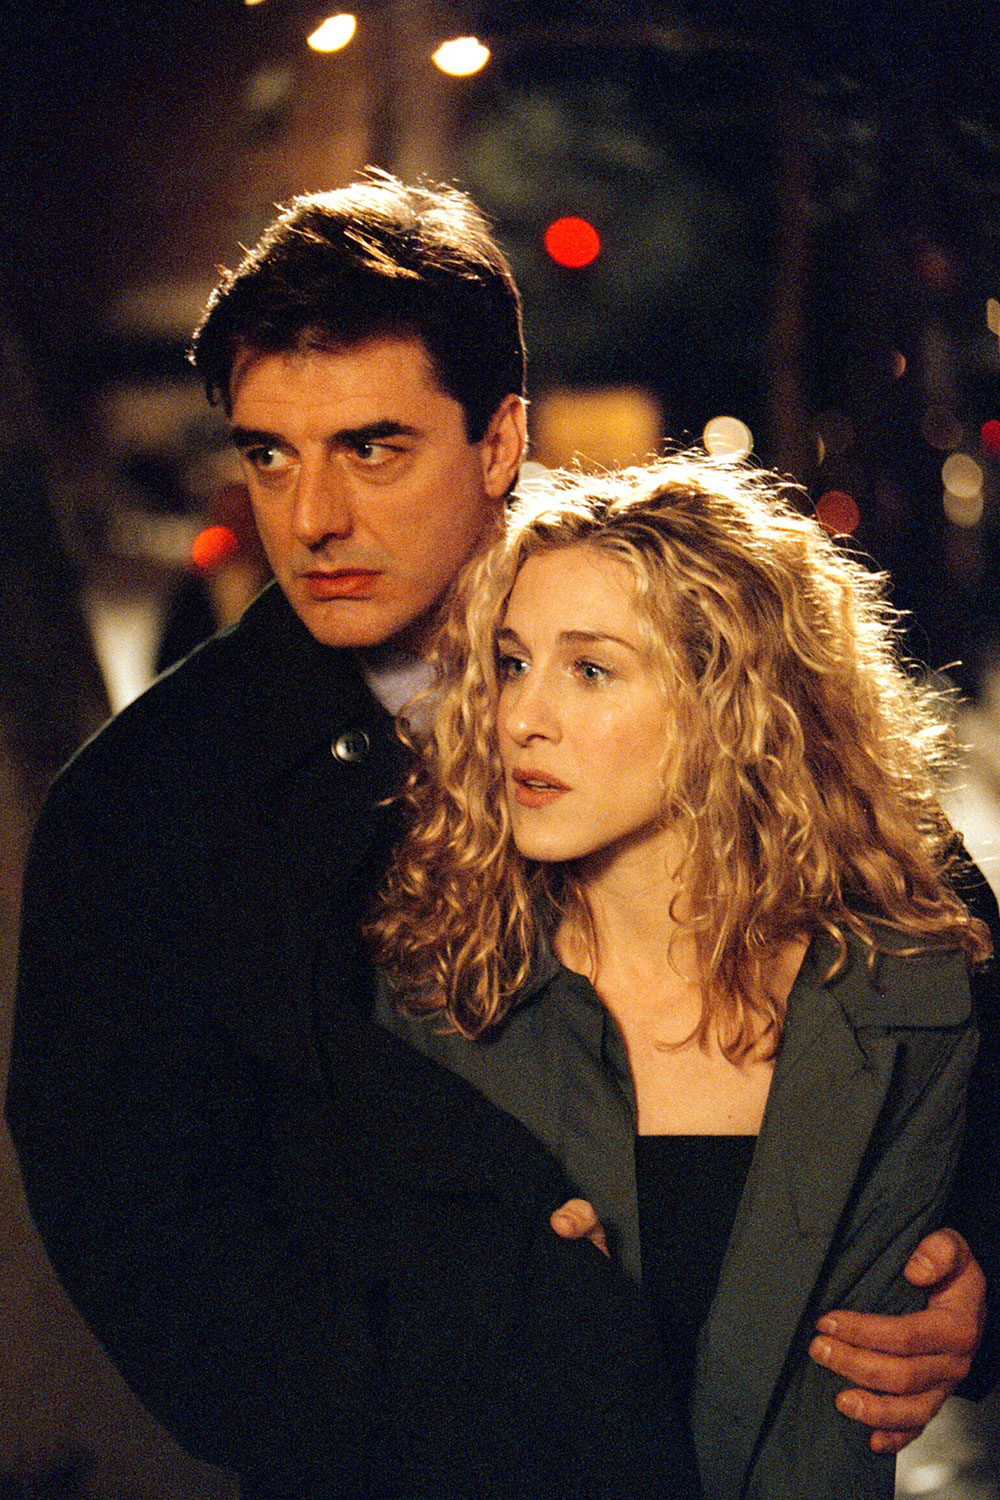 Carrie Bradshaw and Mr. Big